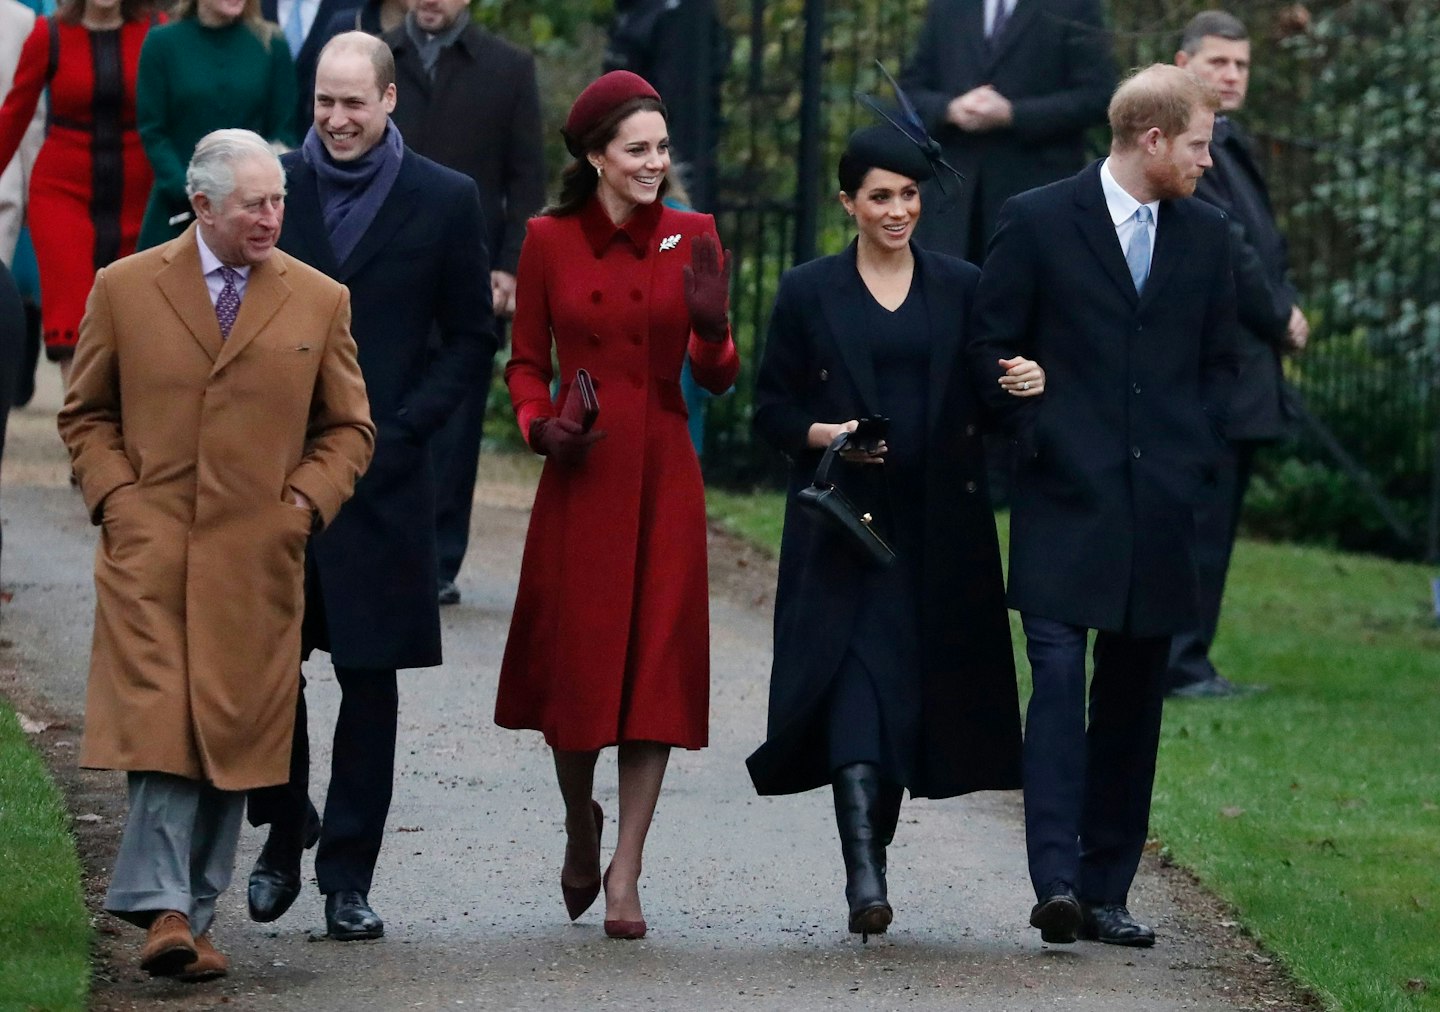 The Duke and Duchess of Cambridge's children were not at the Christmas Day Sandringham church service